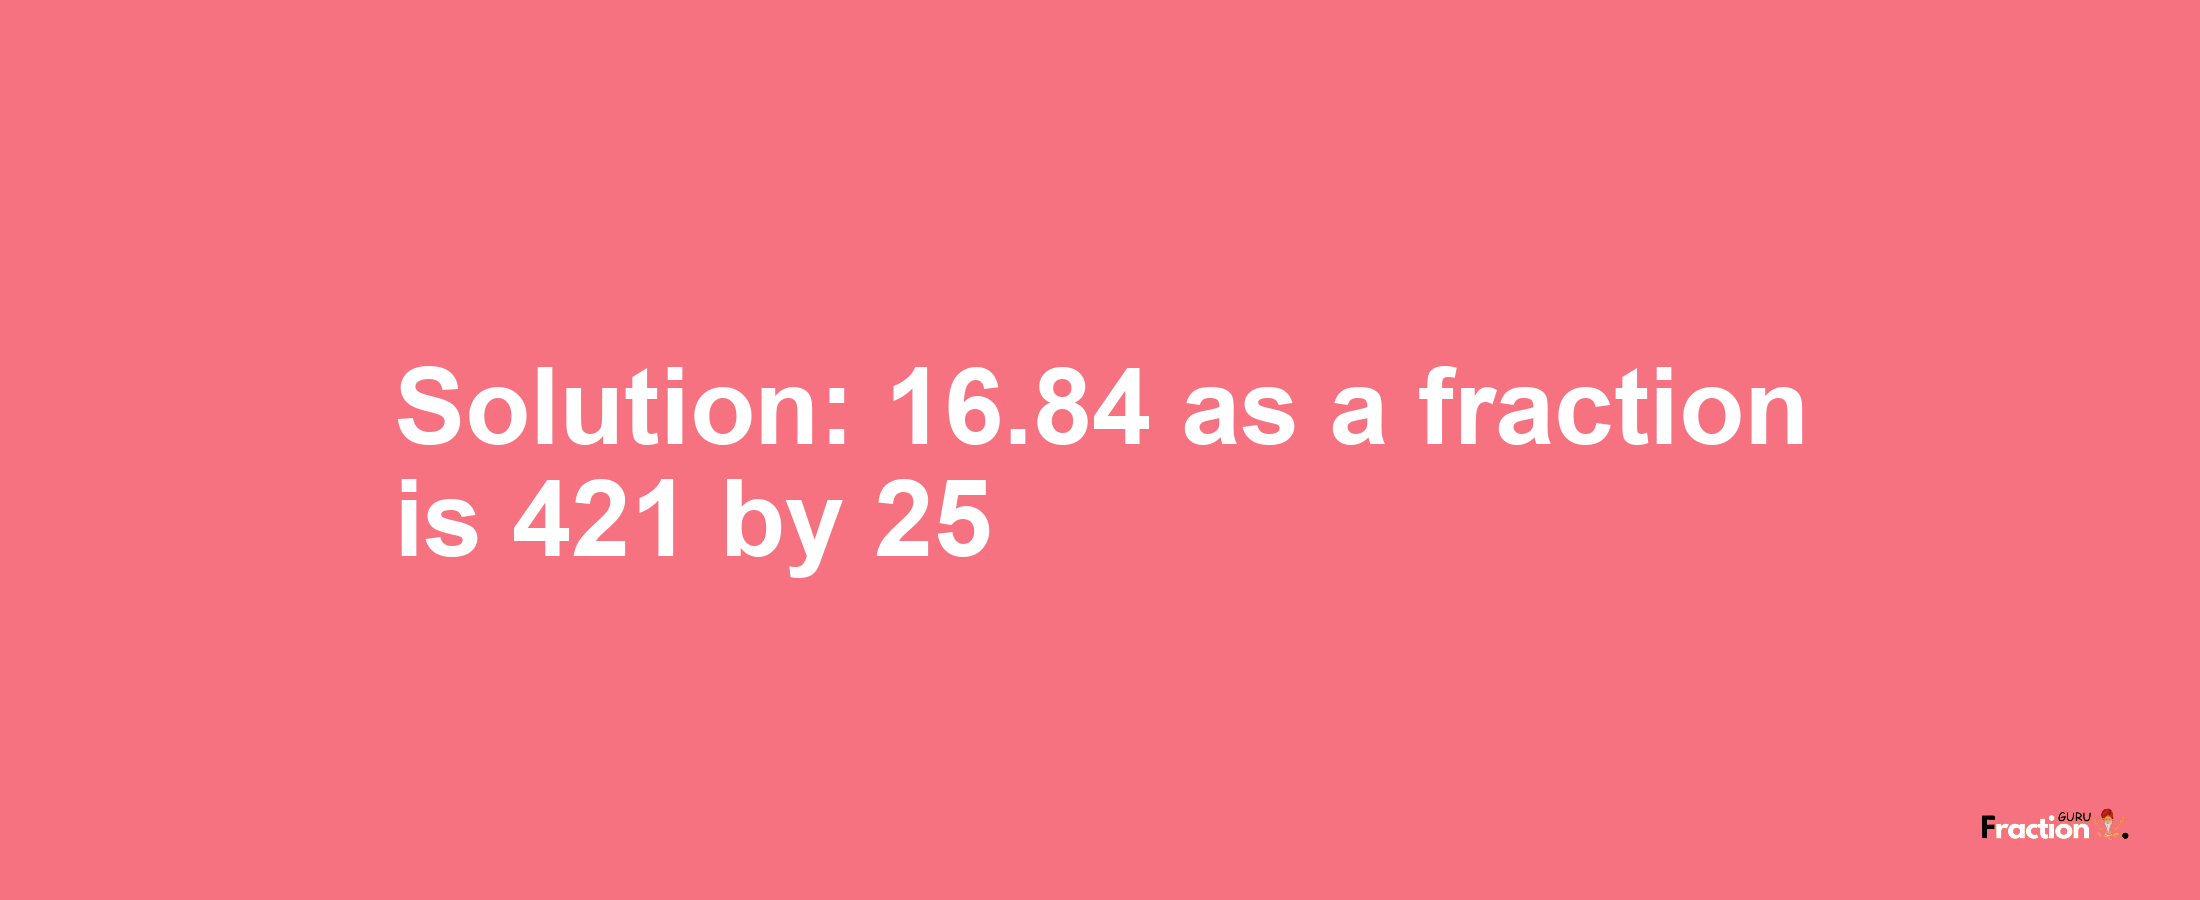 Solution:16.84 as a fraction is 421/25